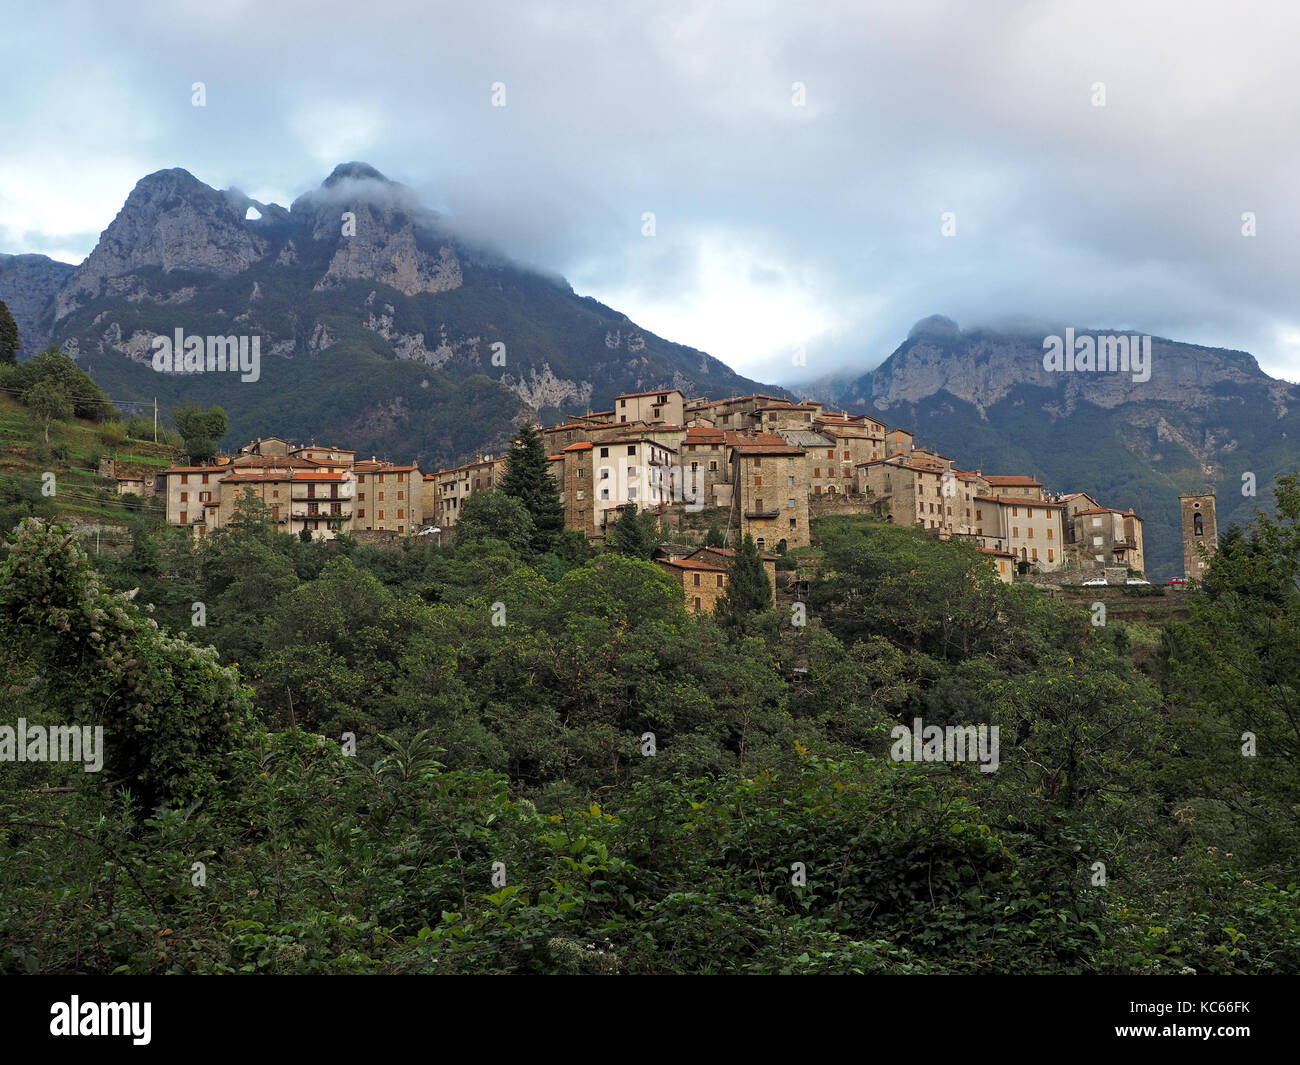 View of the hilltop village of Pruno amongst wooded slopes beneath Monte Forato in the Apuan Alps in Tuscany, Italy Stock Photo